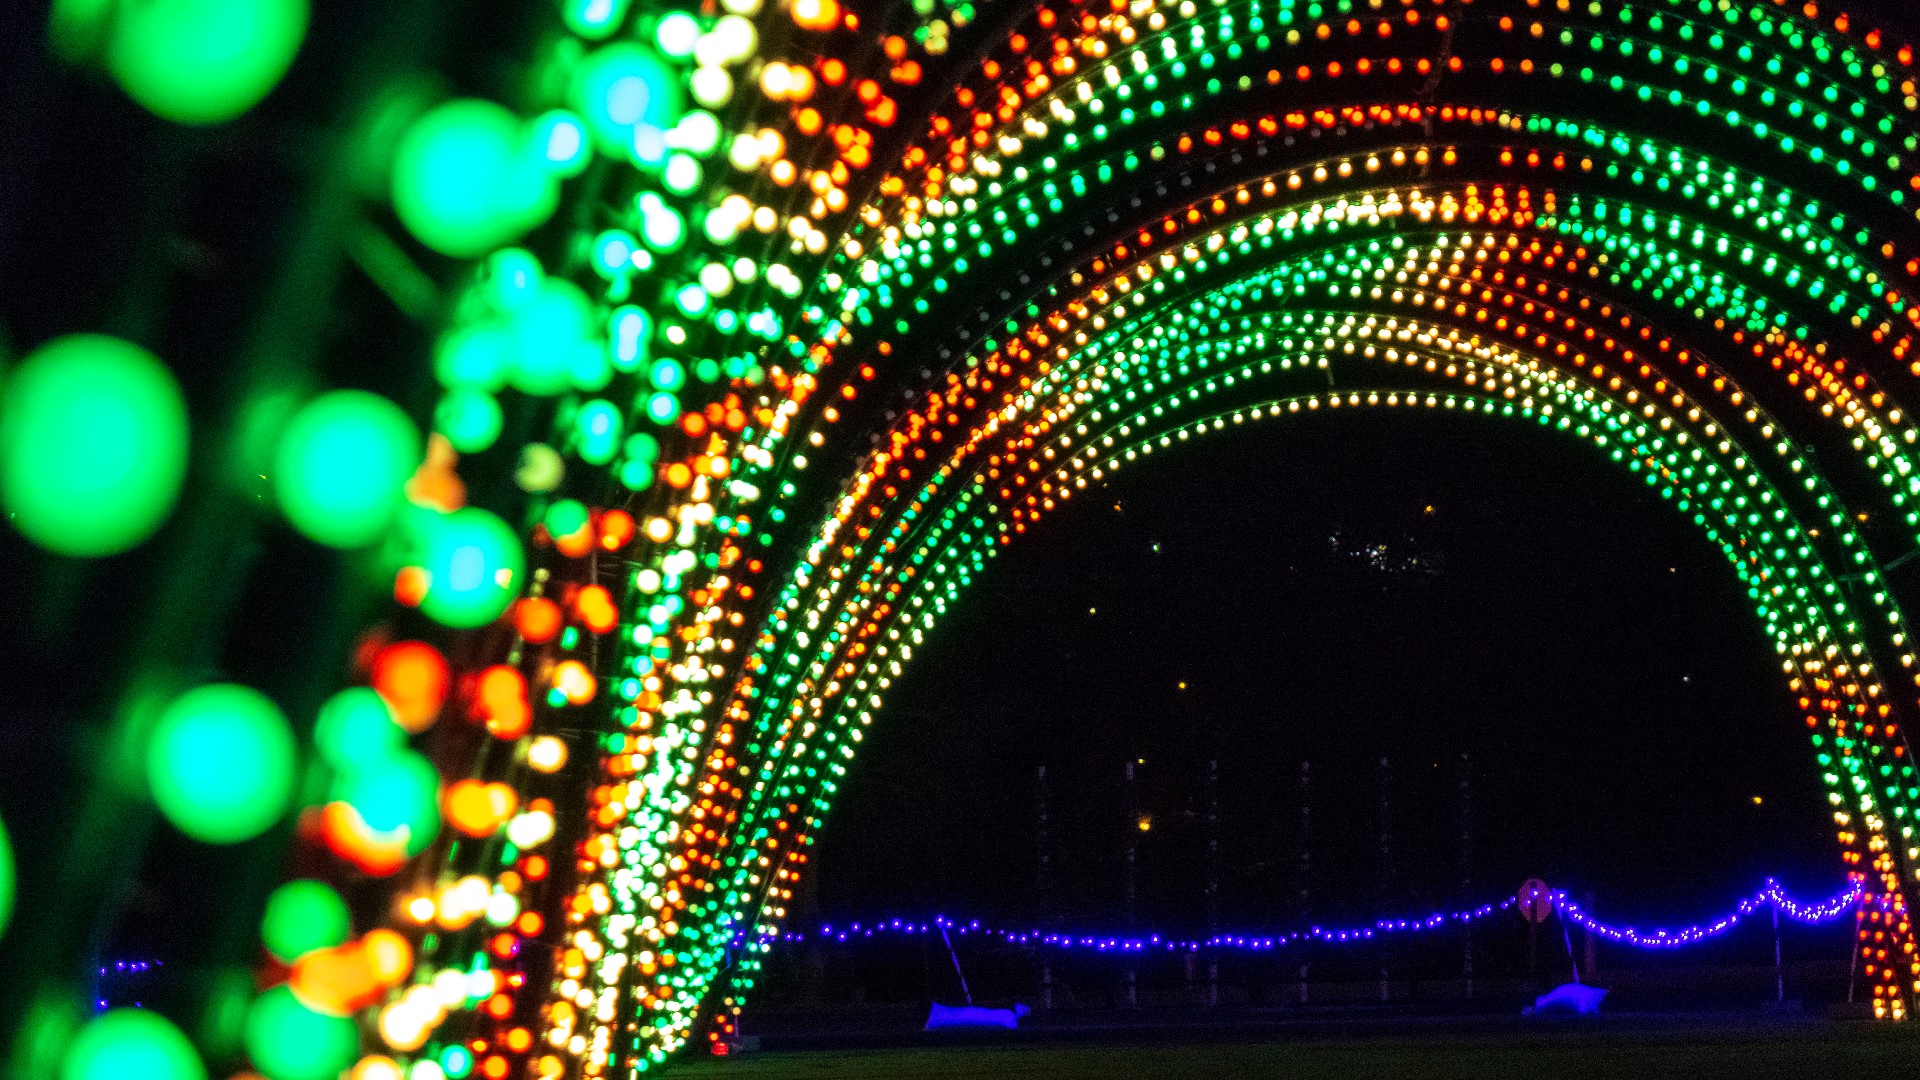 Take a virtual reality drive through Christmas in Color, the Christmas light display at Water Worldnews.com